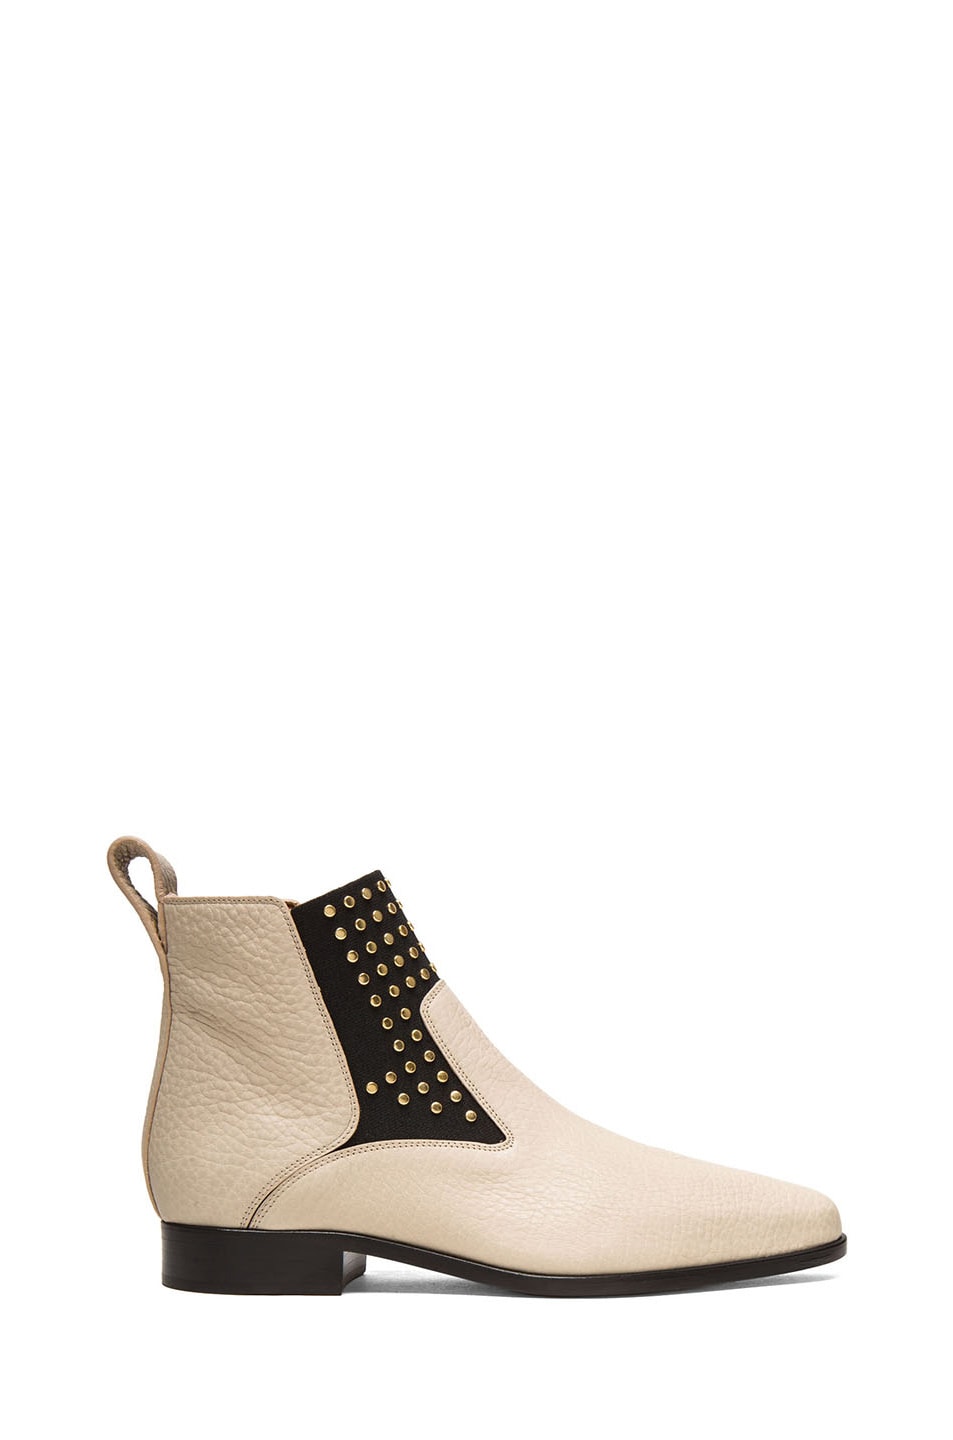 Image 1 of Chloe Studded Leather Boots in Natural Beige